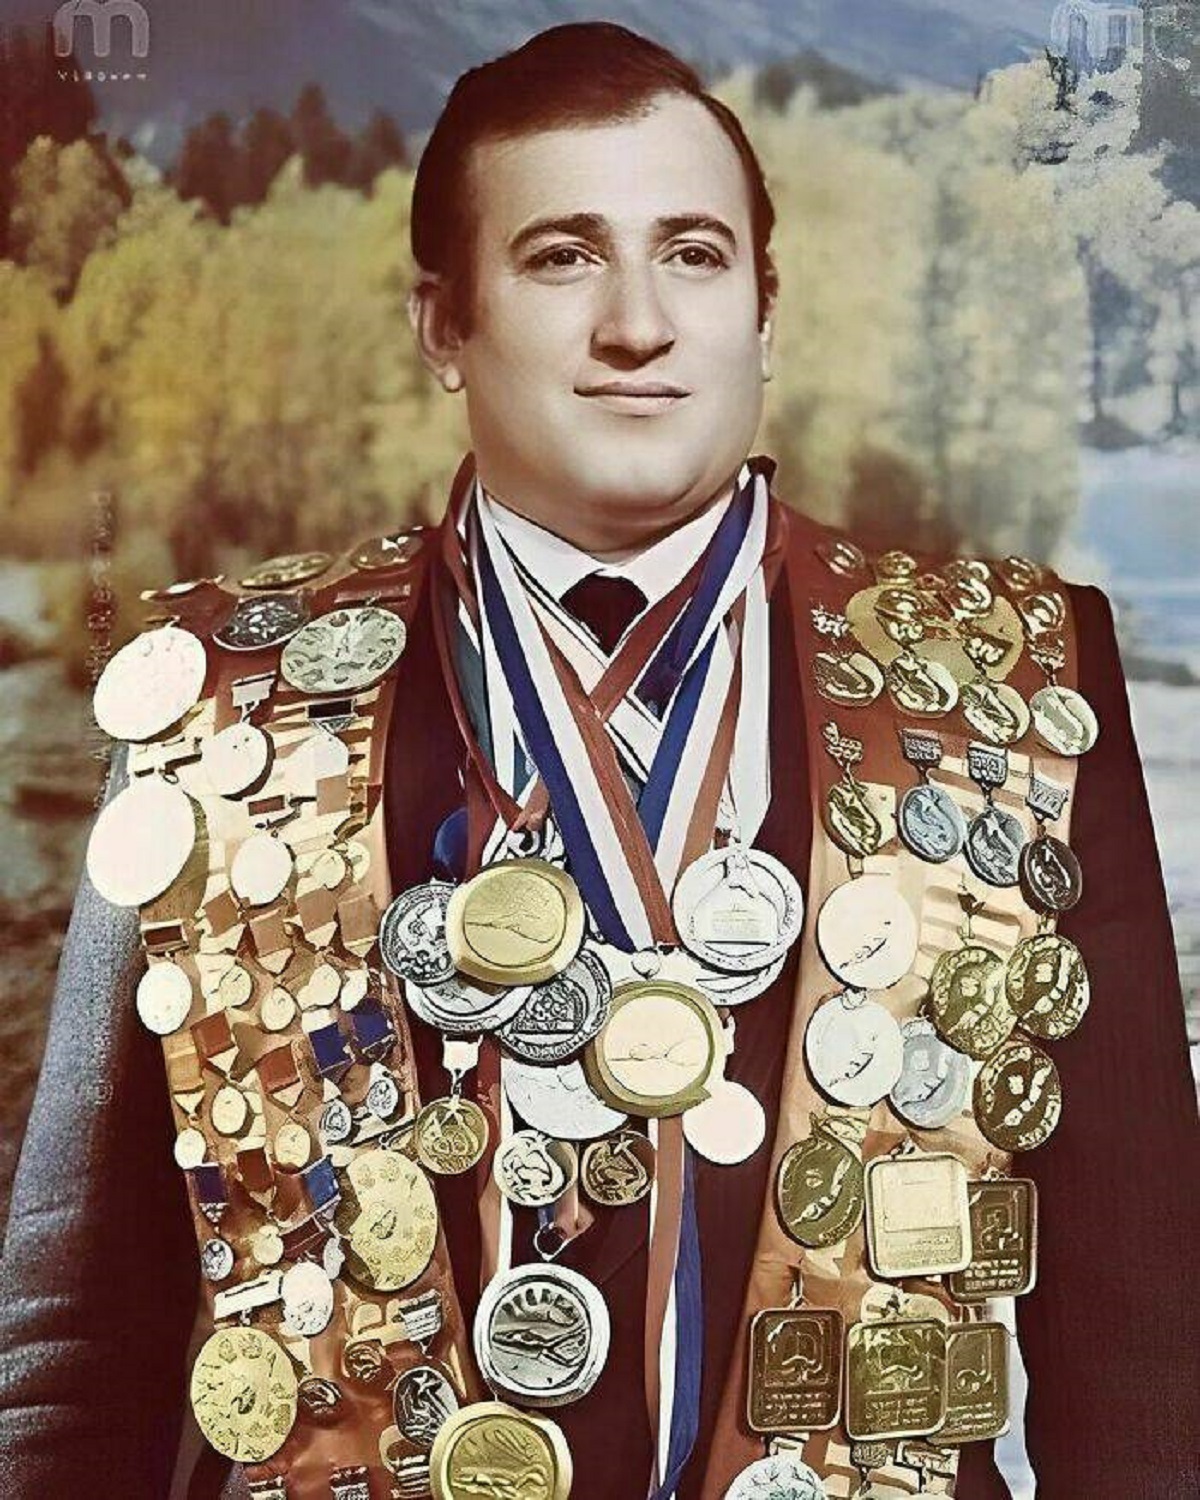 "Shavarsh Karapetyan, An Armenian Finswimmer(10-Time World Record Holder), Who Saved Lives Of 20 Drowning Passengers In A Sinking Trolleybus Which Fell Of A Bridge Into The Yerevan Lake"